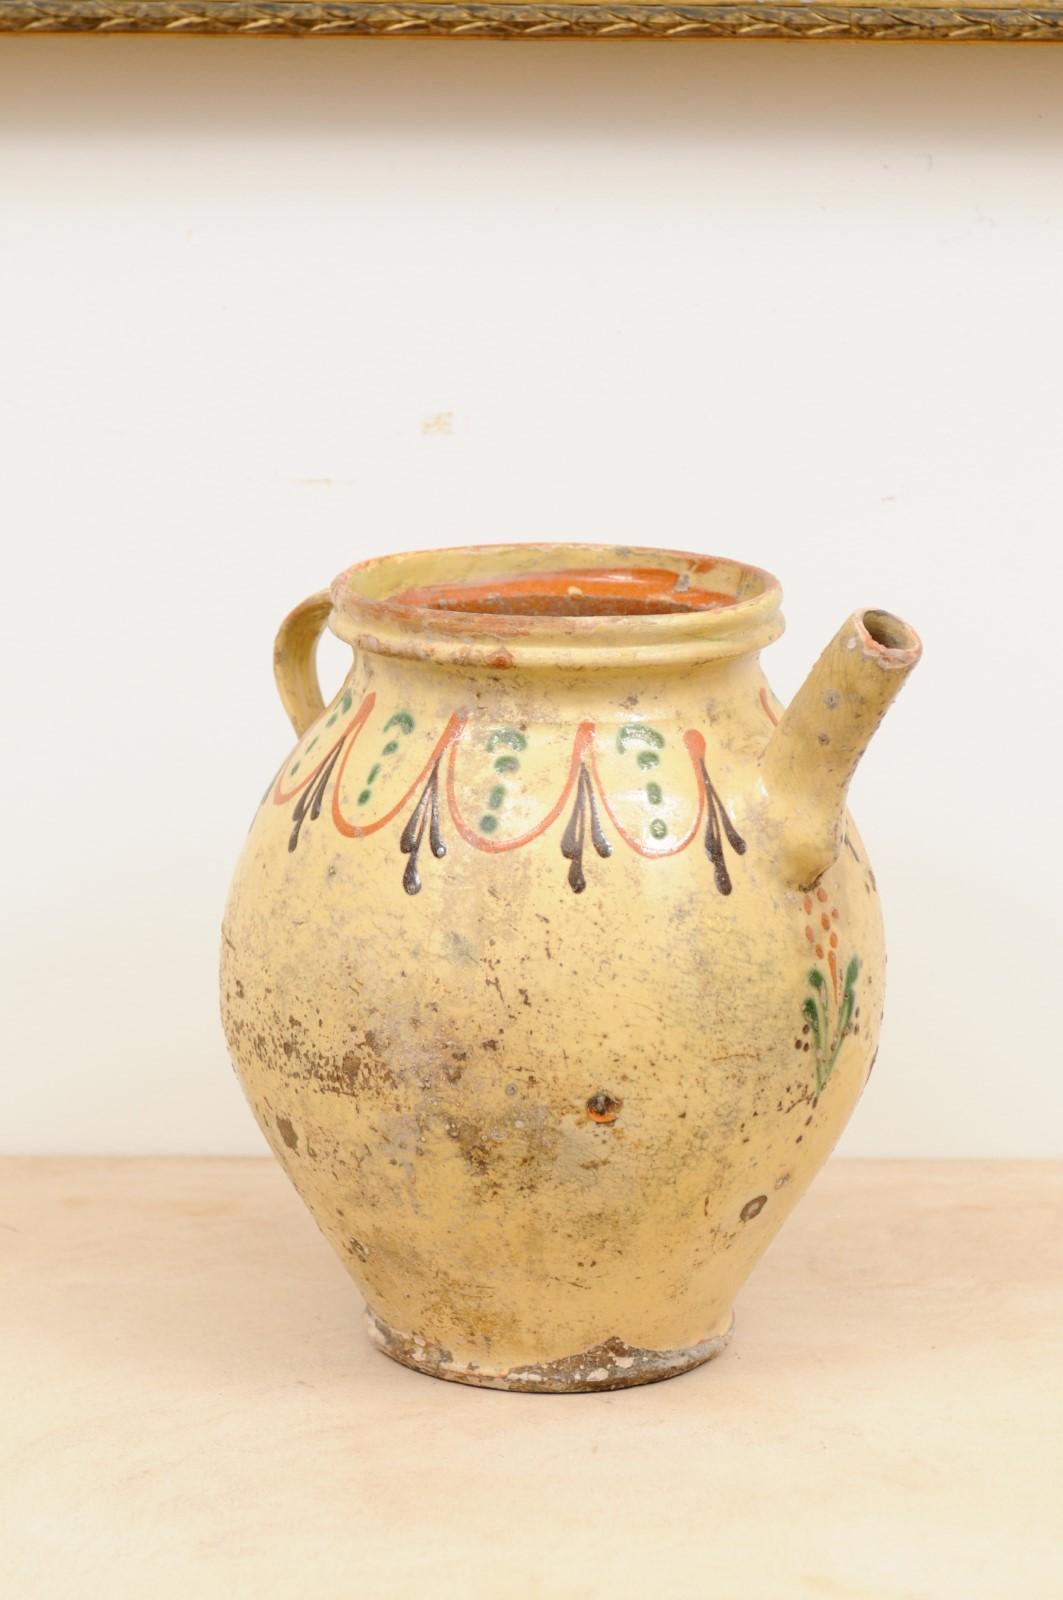 A French glazed pottery olive oil pot from the 19th century, with brown, orange and green motifs. Created in France during the 19th century, this rustic olive oil pot boasts a nicely weathered appearance delicately accented with a frieze of green,